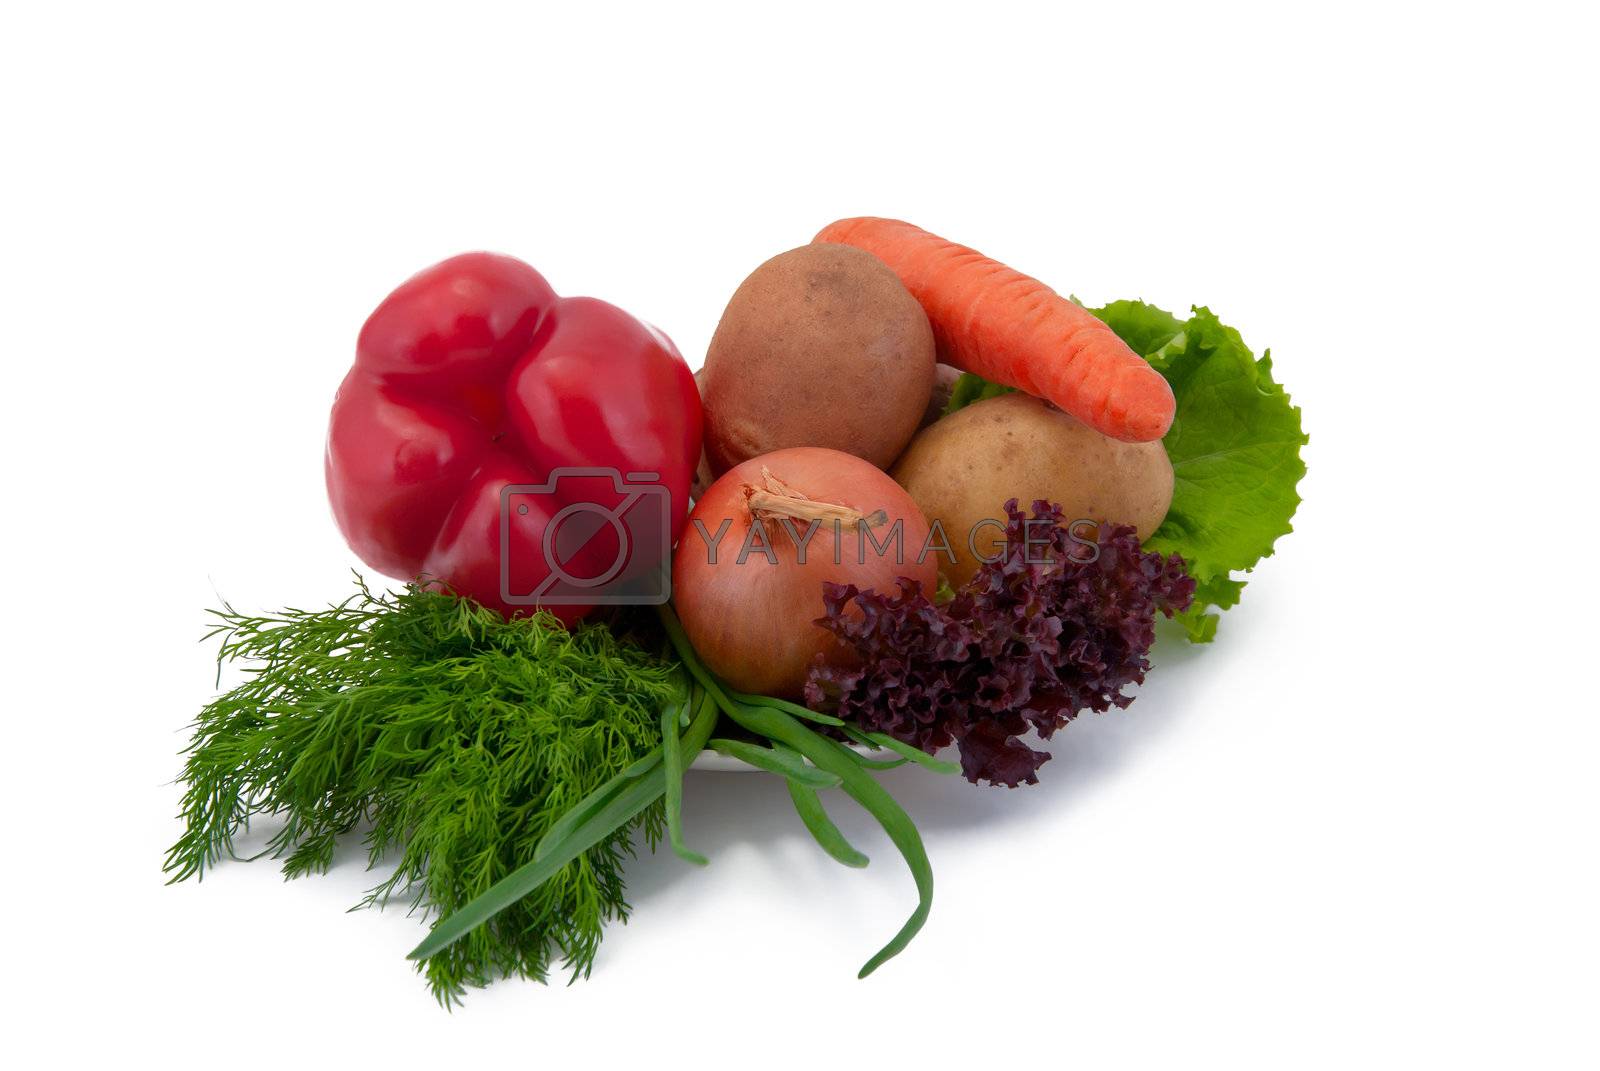 Royalty free image of Vegetables on a plate by firewings